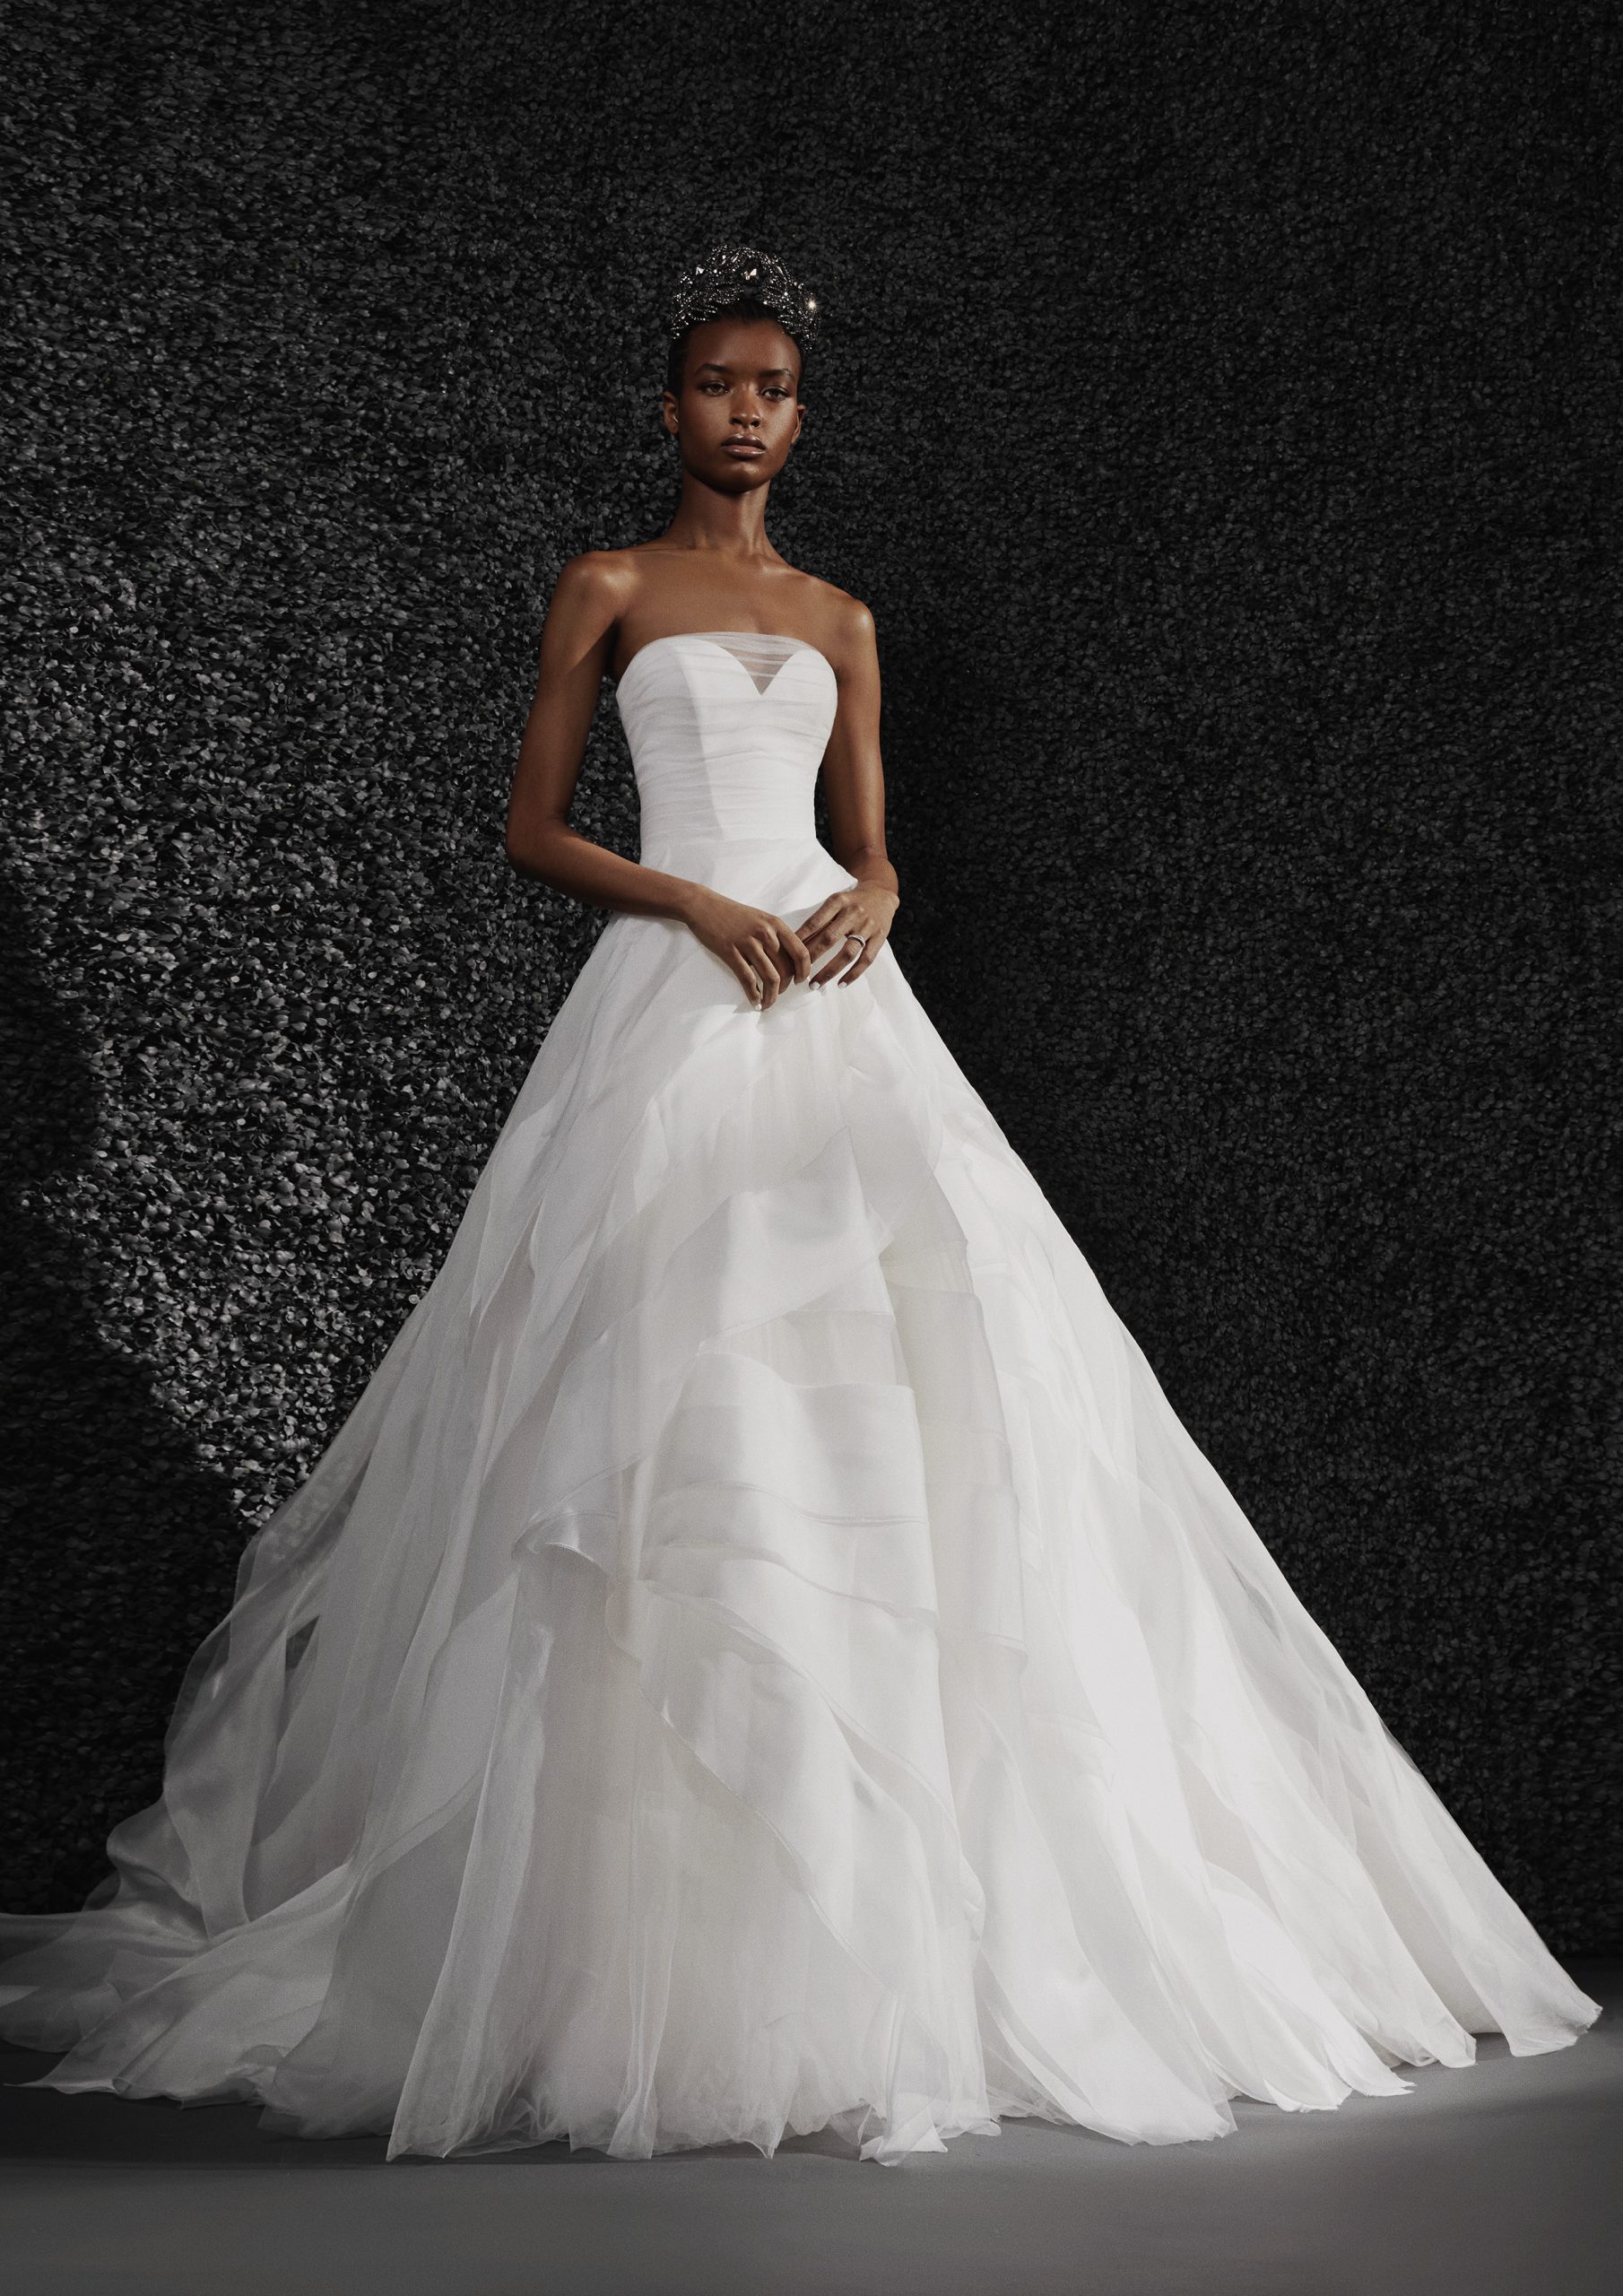 https://www.kleinfeldbridal.com/wp-content/uploads/2021/12/vera-wang-bride-strapless-sweetheart-neckline-ball-gown-wedding-dress-with-organza-and-tulle-details-34435966-scaled.jpg